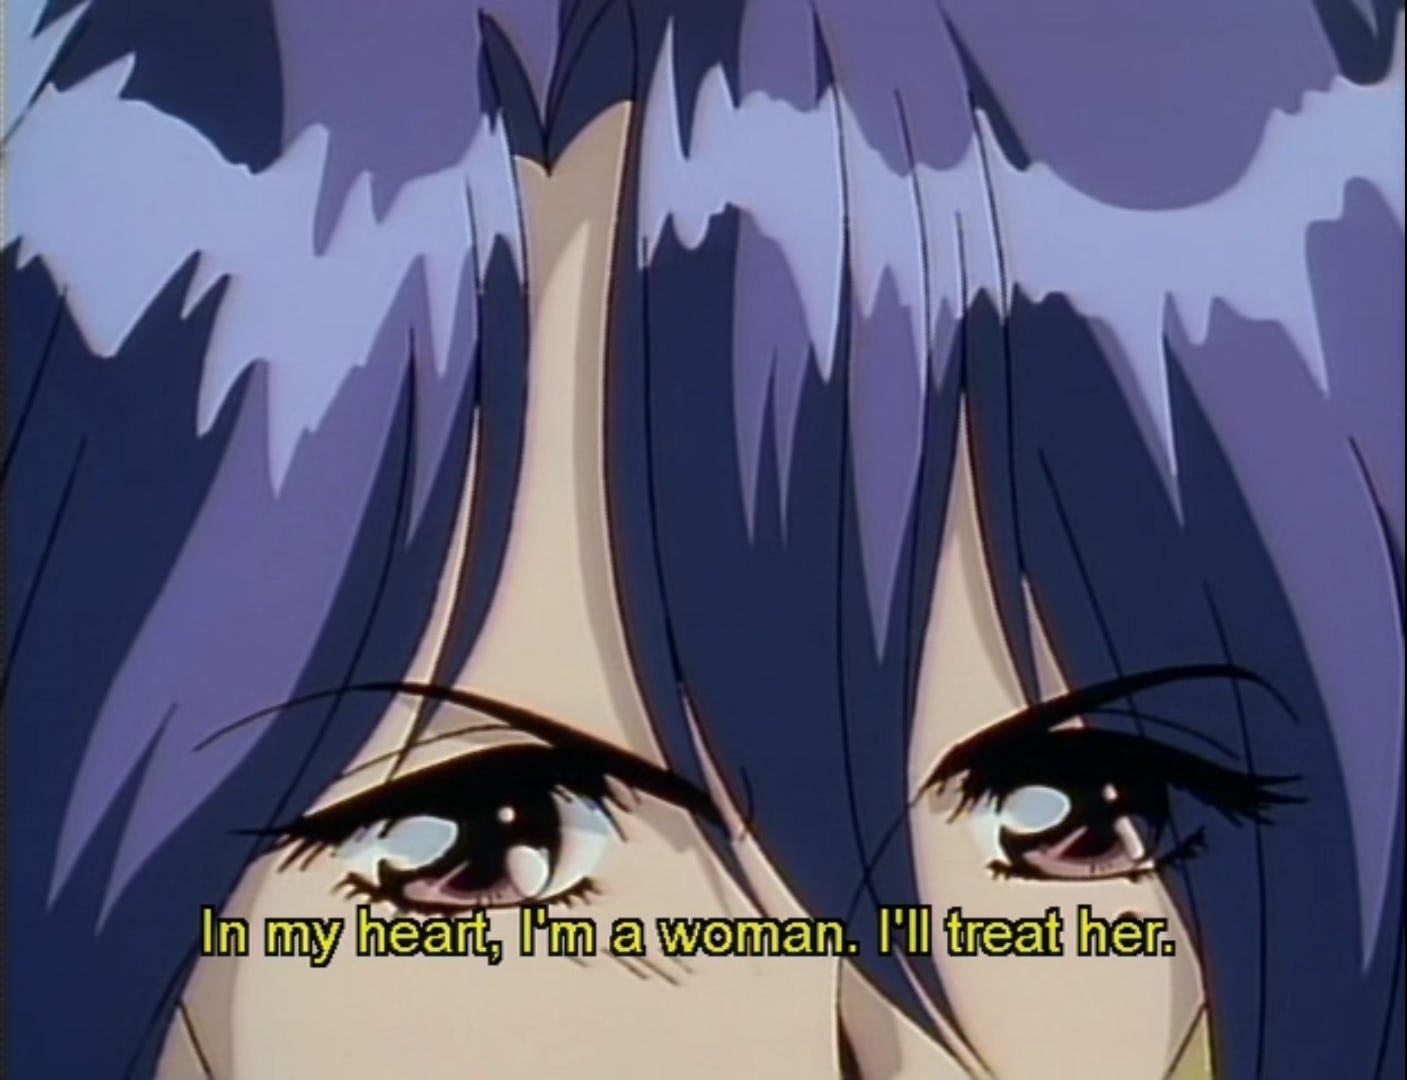 From the anime: close in shot of Nuriko's eyes. Subtitles read: In my heart, I'm a woman. I'll treat her.